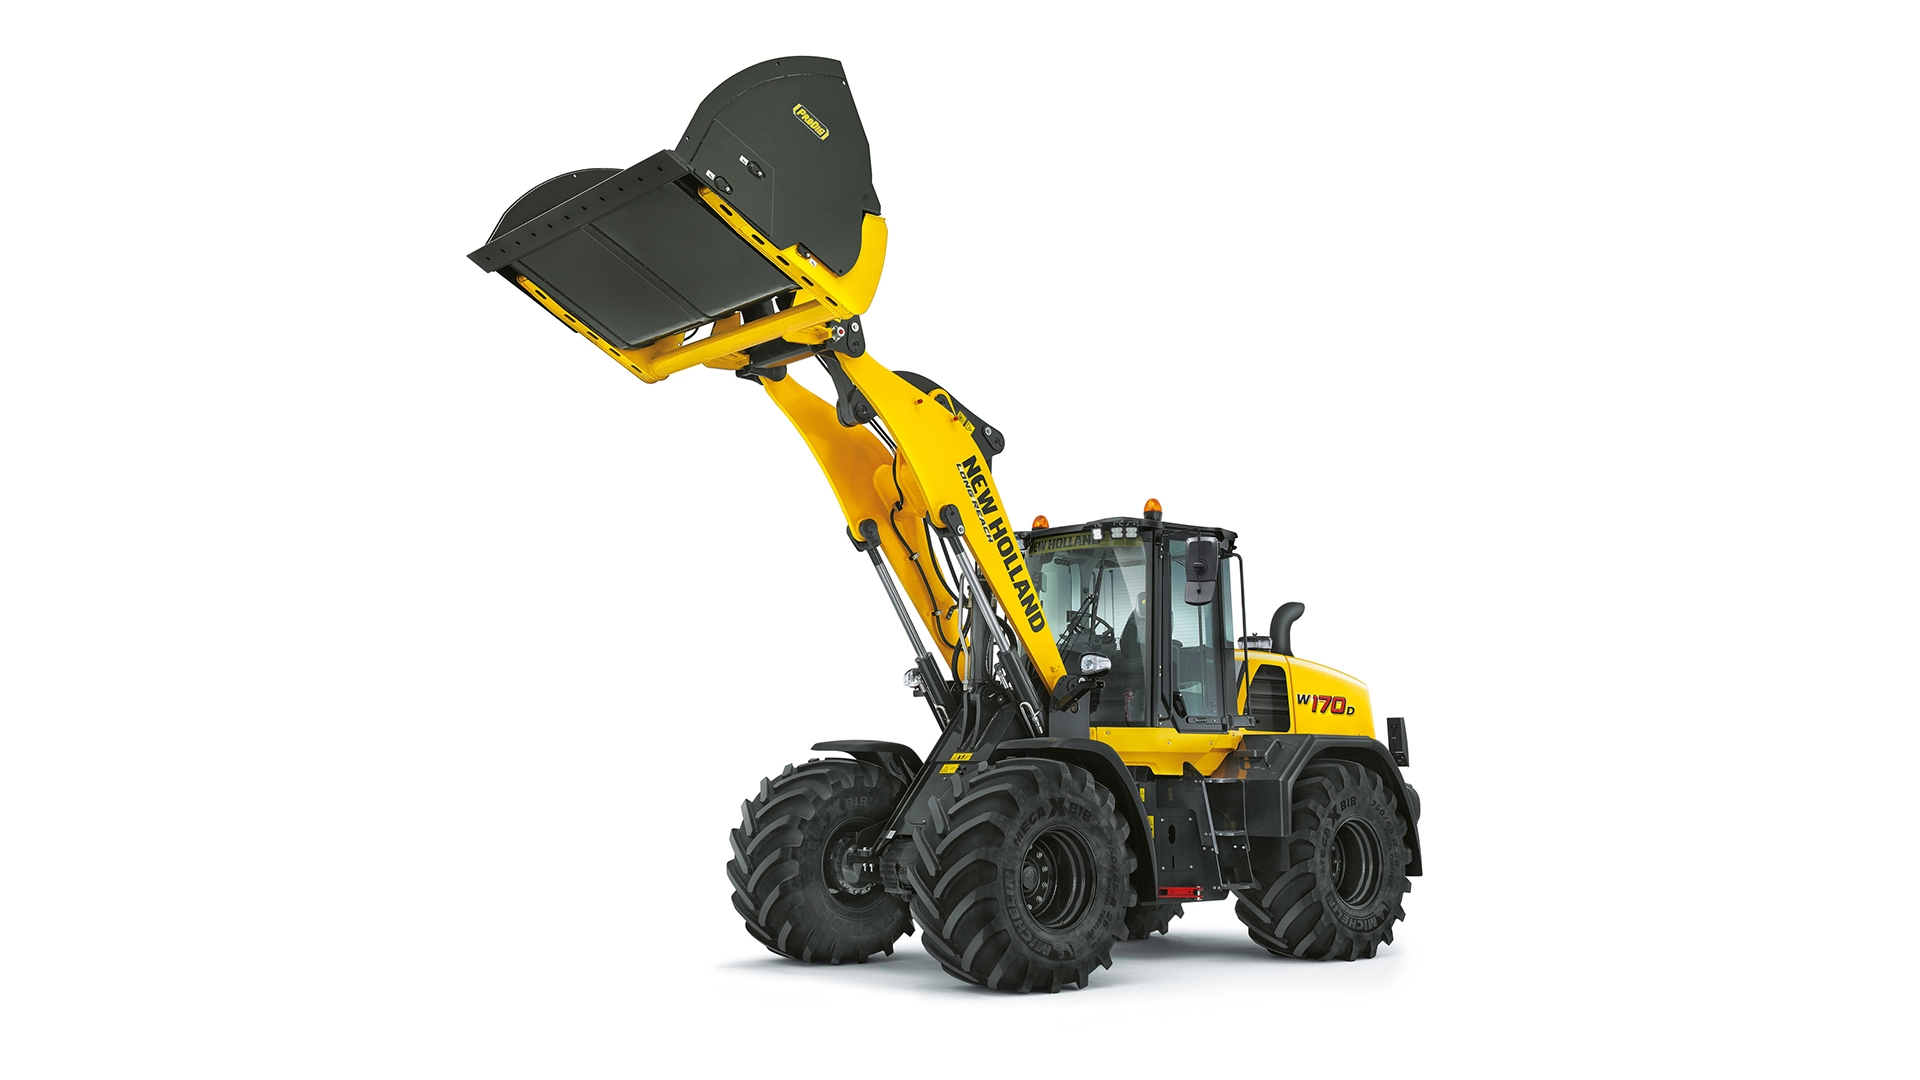 The New Holland W170D wheel loader is equipped with a high lift grain bucket attachment.